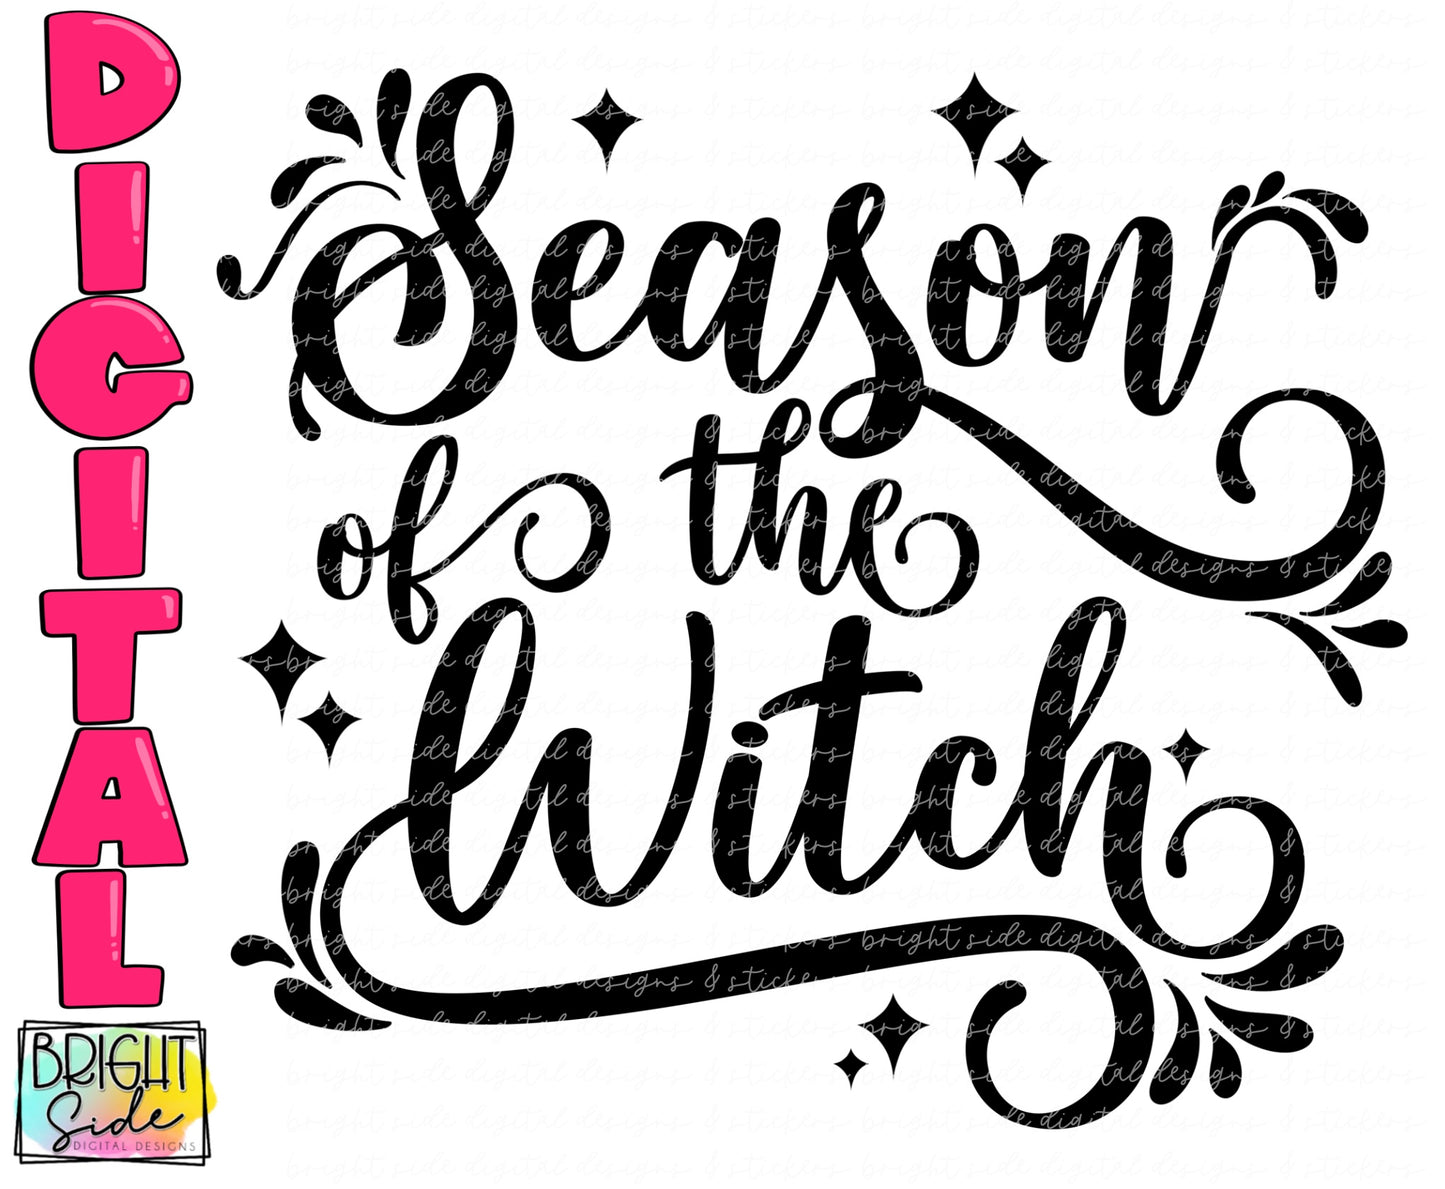 Season of the witch